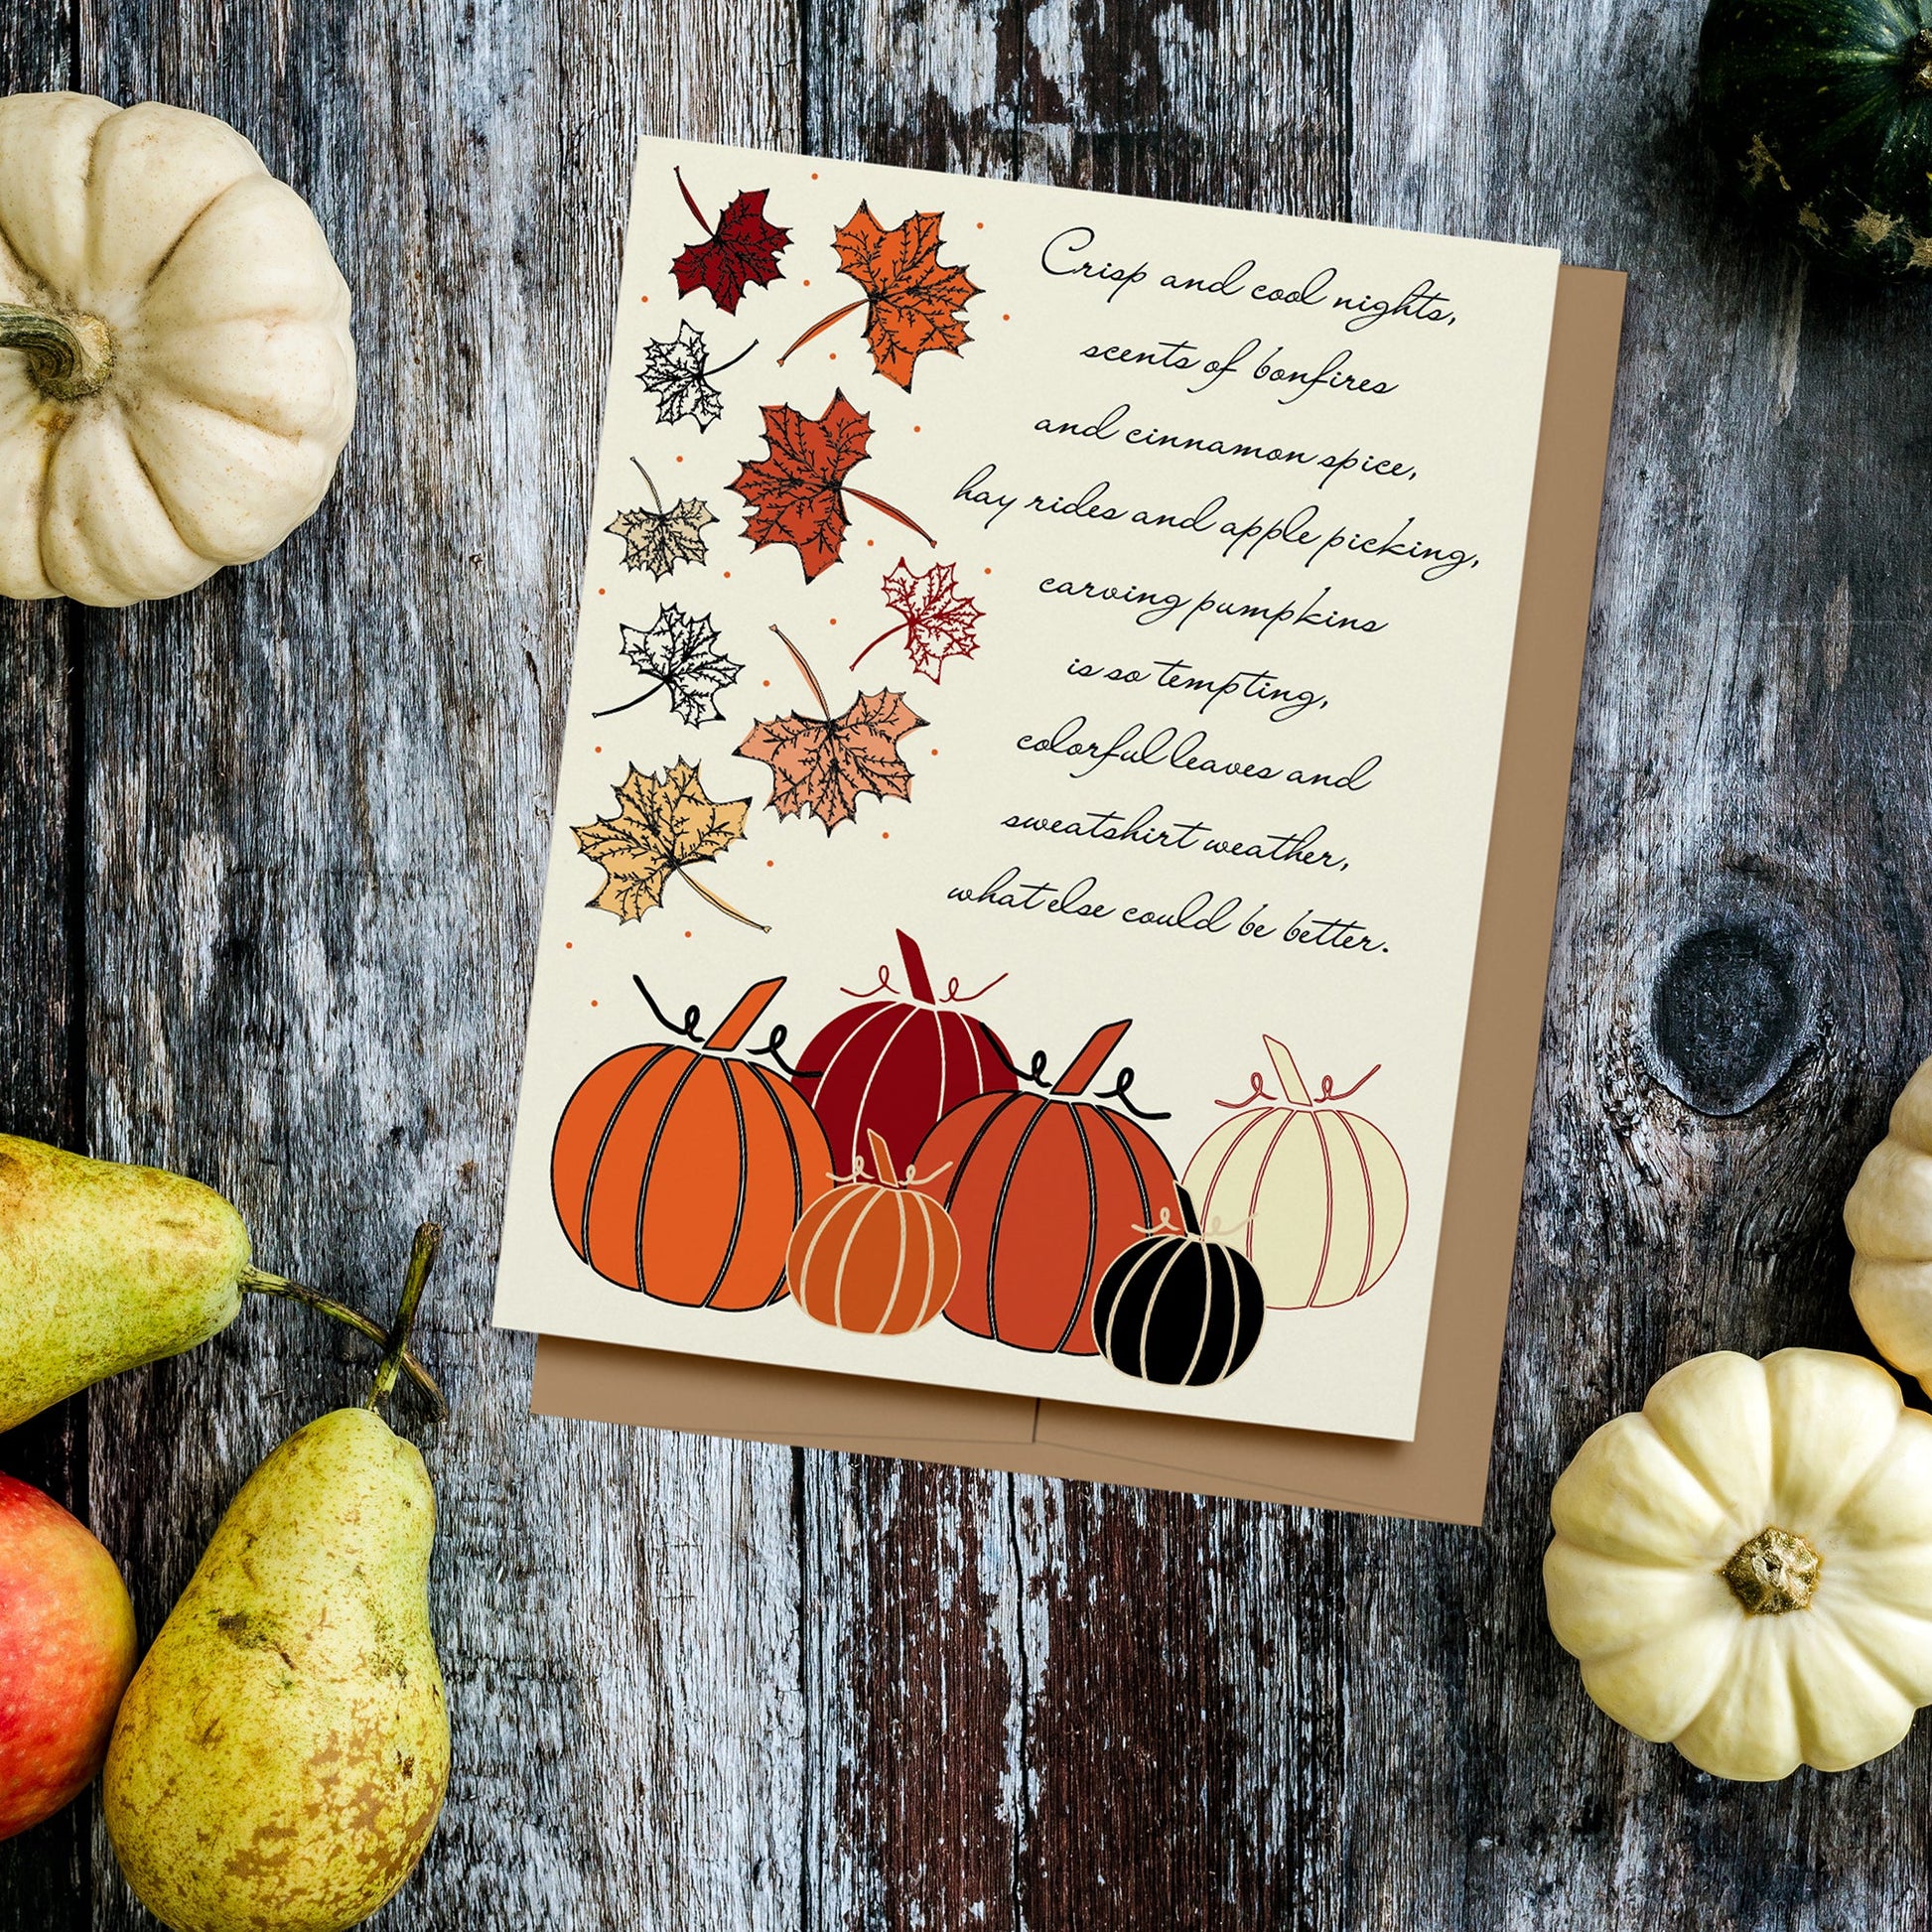 A fun card to celebrate the autumn season featuring hand drawn pumpkins and autumn leaves on a cream background which reads, "Crisp and cool nights, scents of bonfires and cinnamon spice, hay rides and apple picking, carving pumpkins is so tempting, colorful leaves and sweatshirt weather, what else could be better." Displayed on a wood background surrounded by gourds, pears and apple.